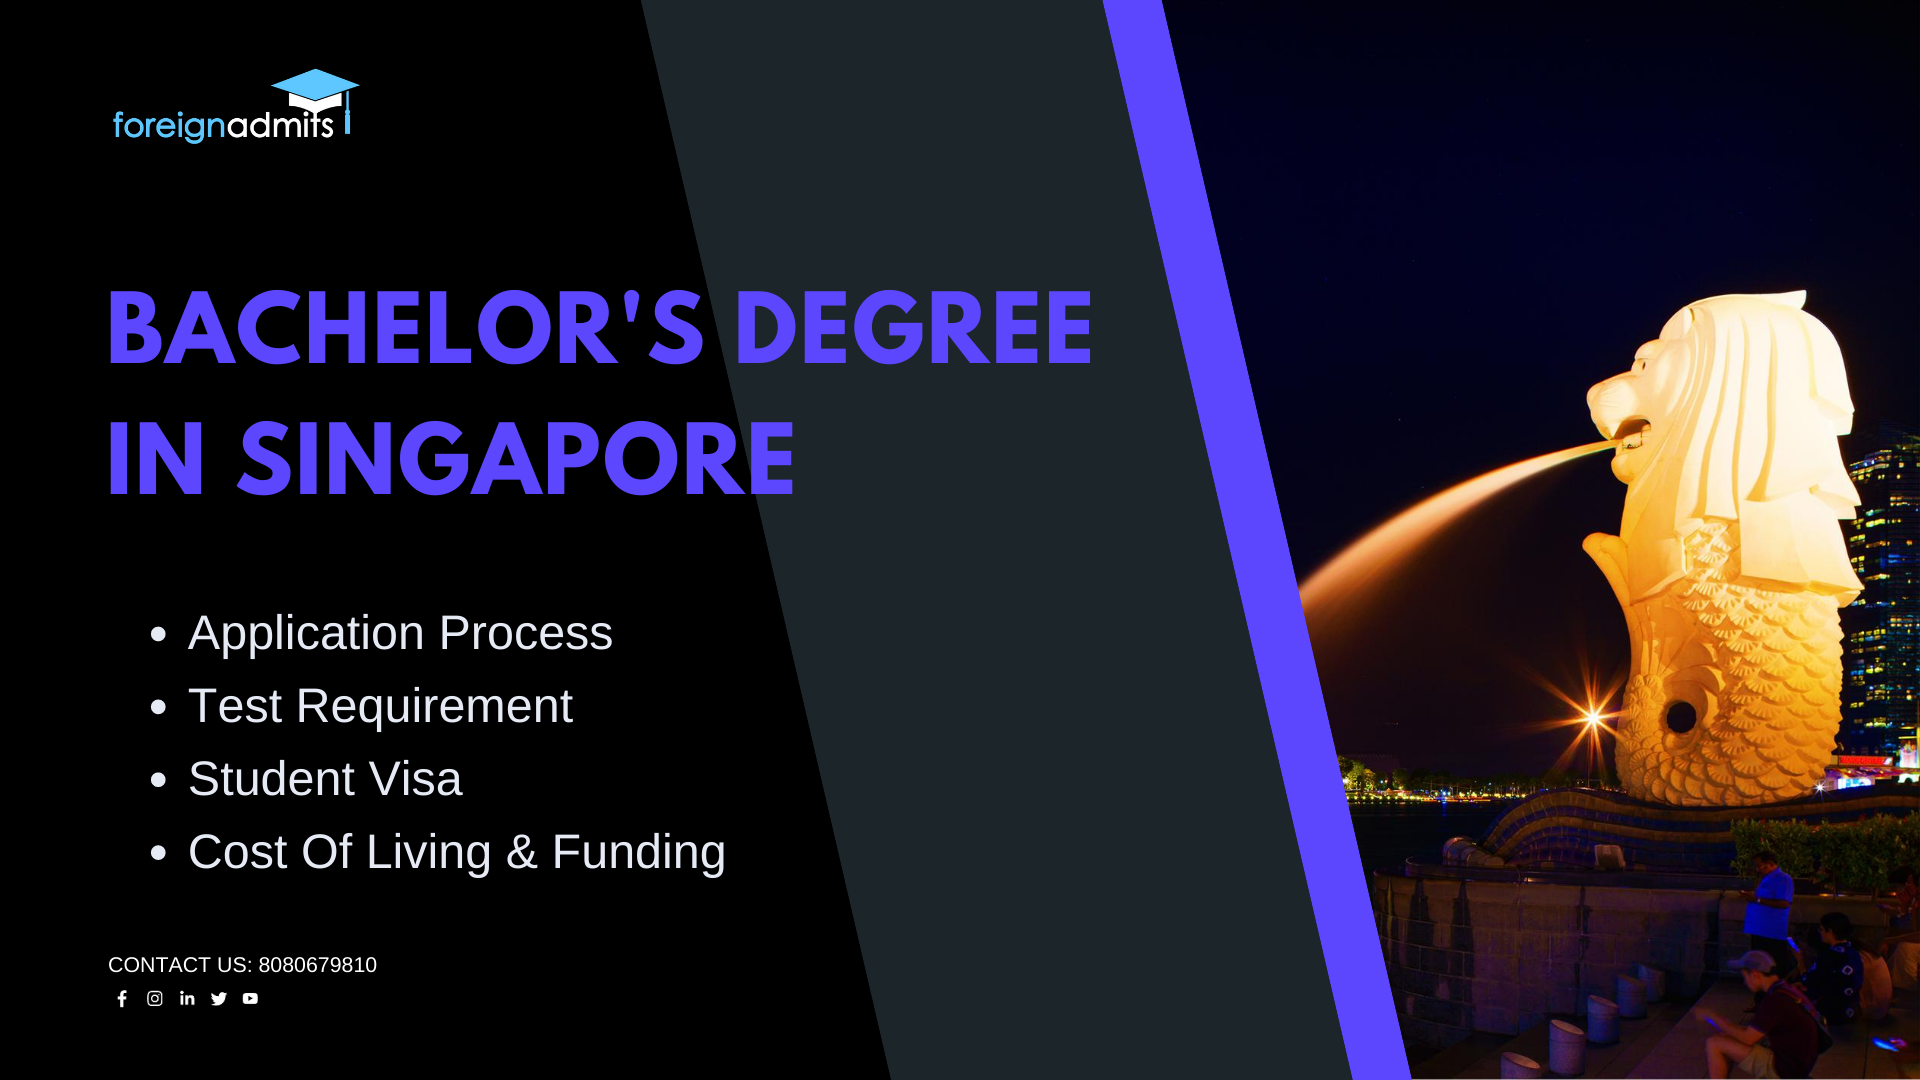 Bachelor’s Degree in Singapore